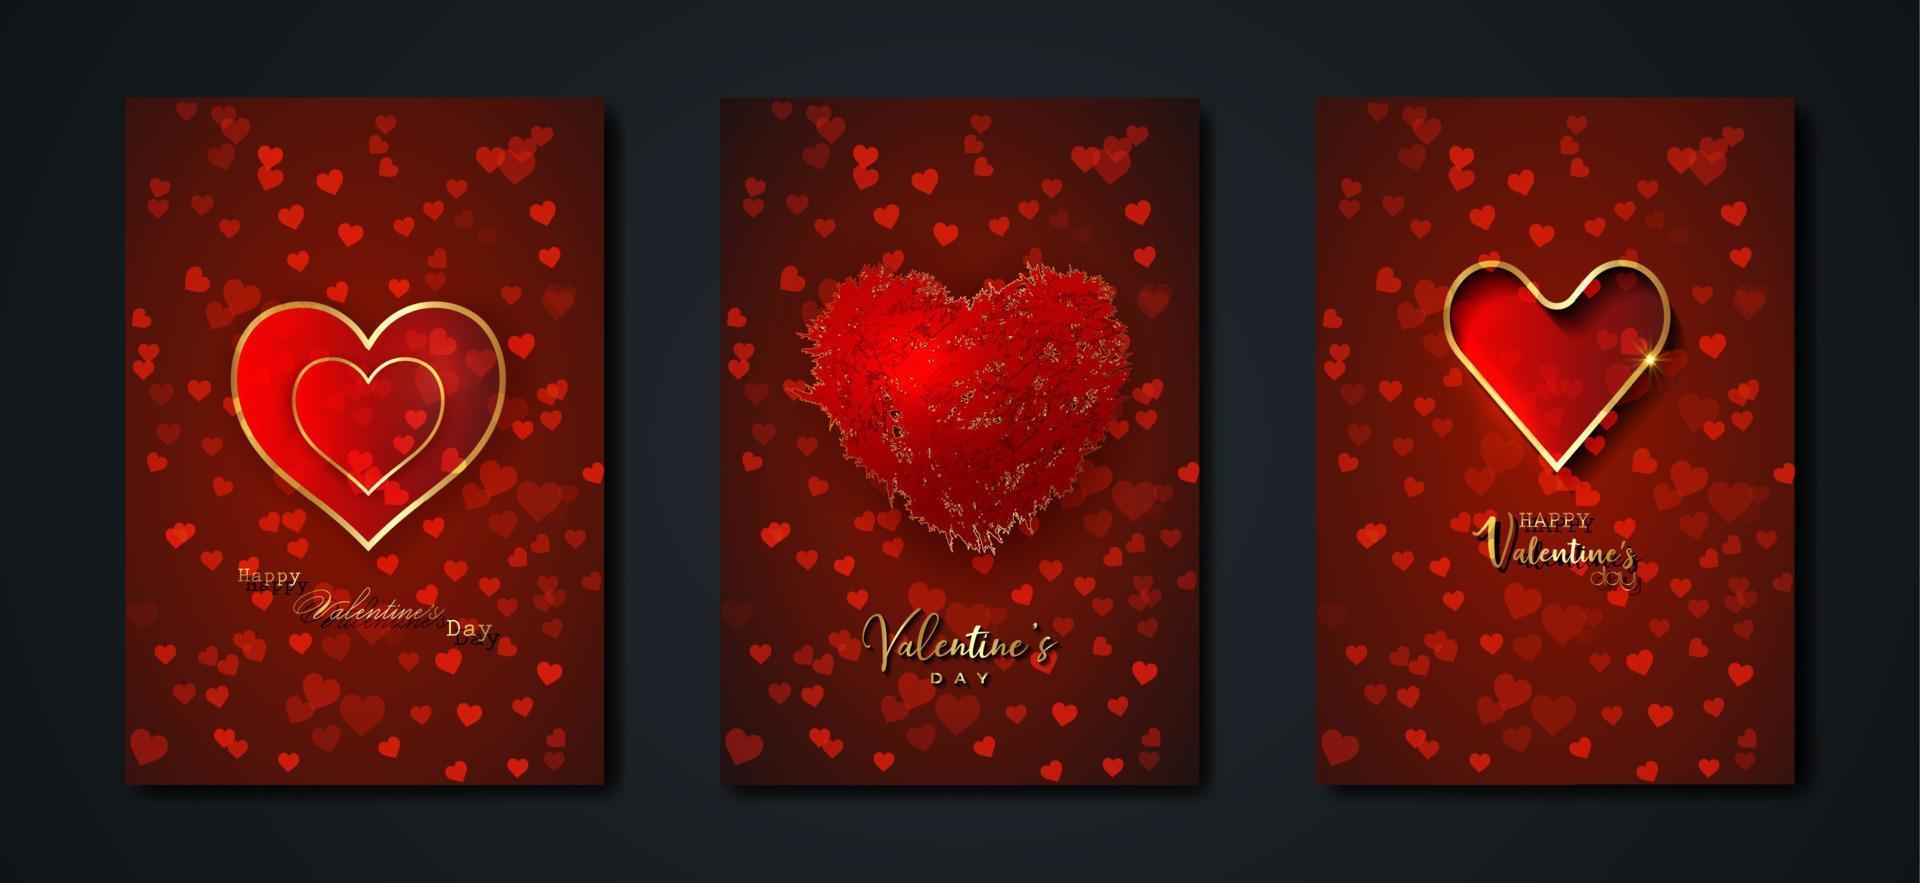 Happy Valentines day vector set greeting card. Gold hearts on red background. Golden holiday poster with text, jewels. Concept for Valentines banner, flyer, party invitation, jewelry gift shop